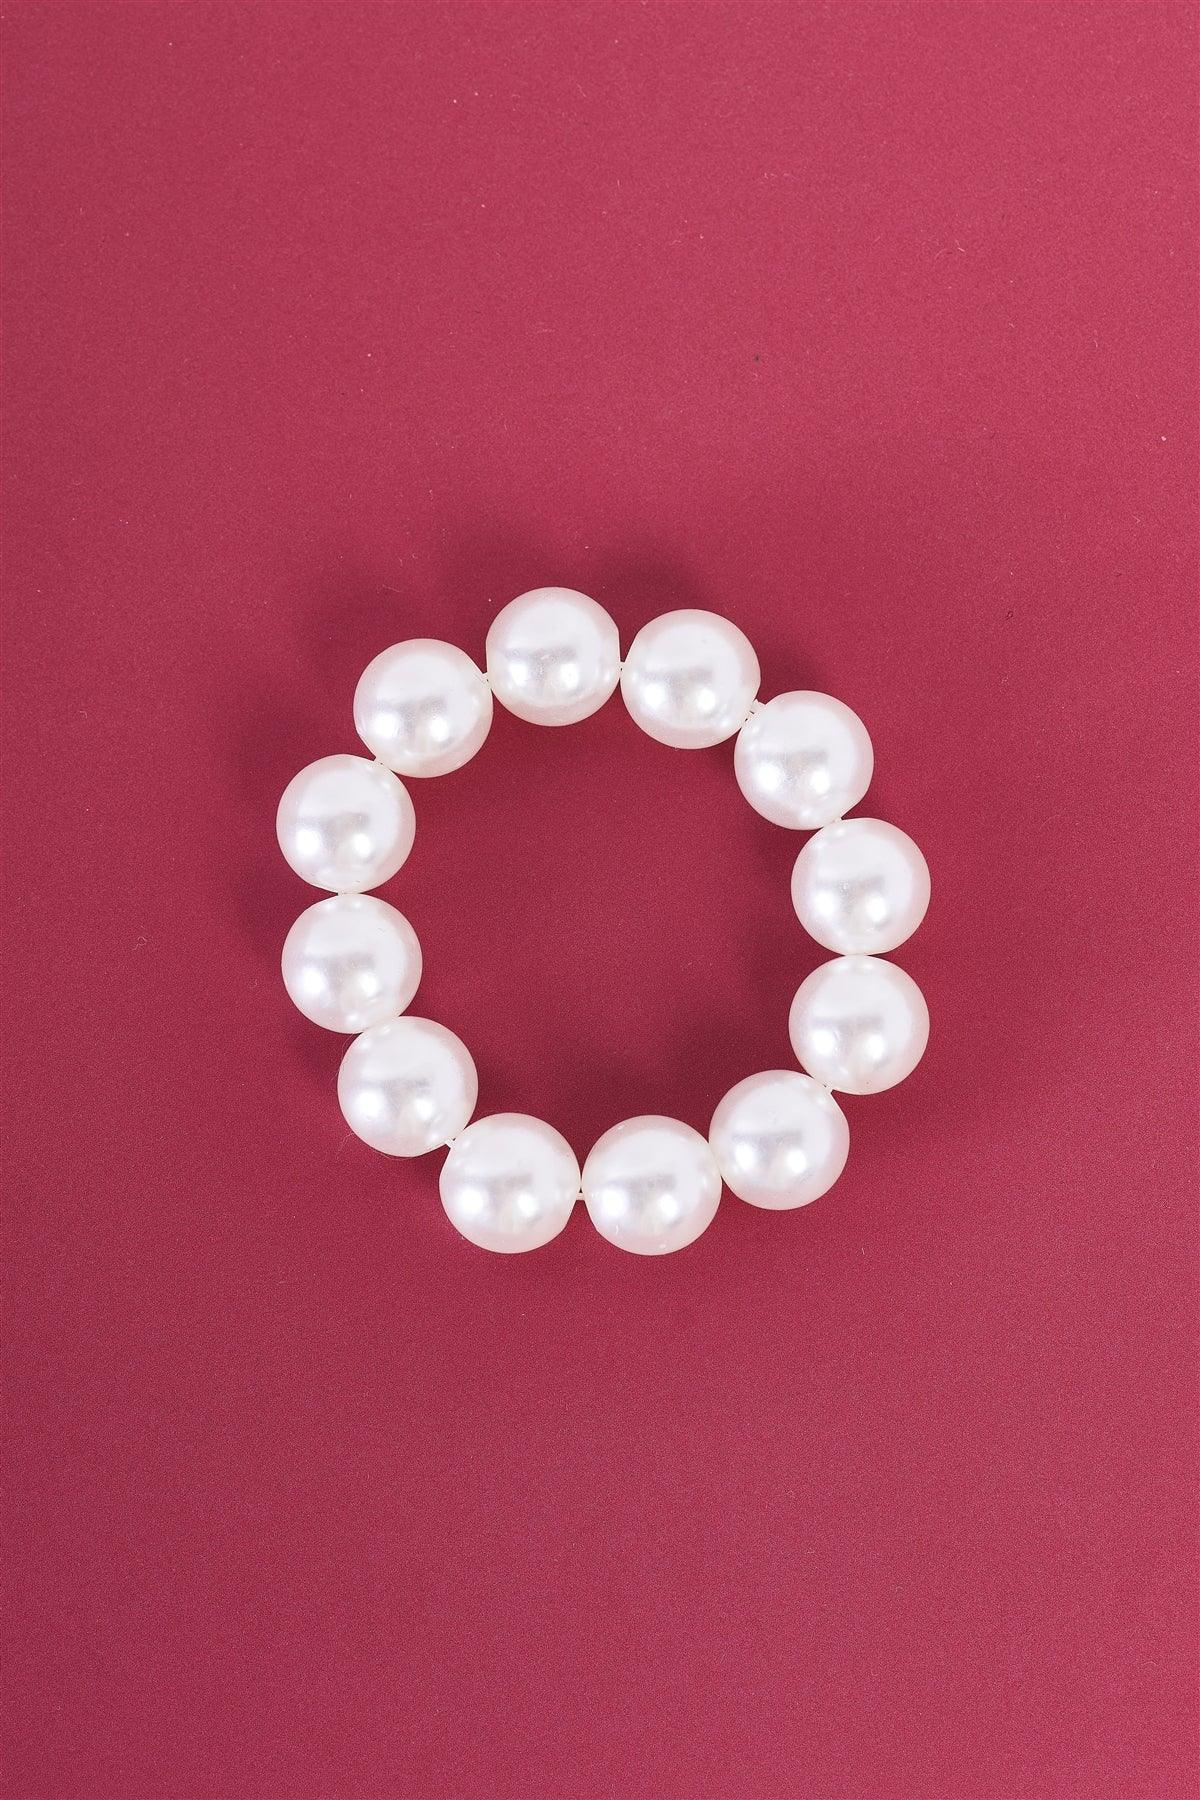 Pearls Are Always Relevant Small Pearl Wrist Bracelet /3 Pieces